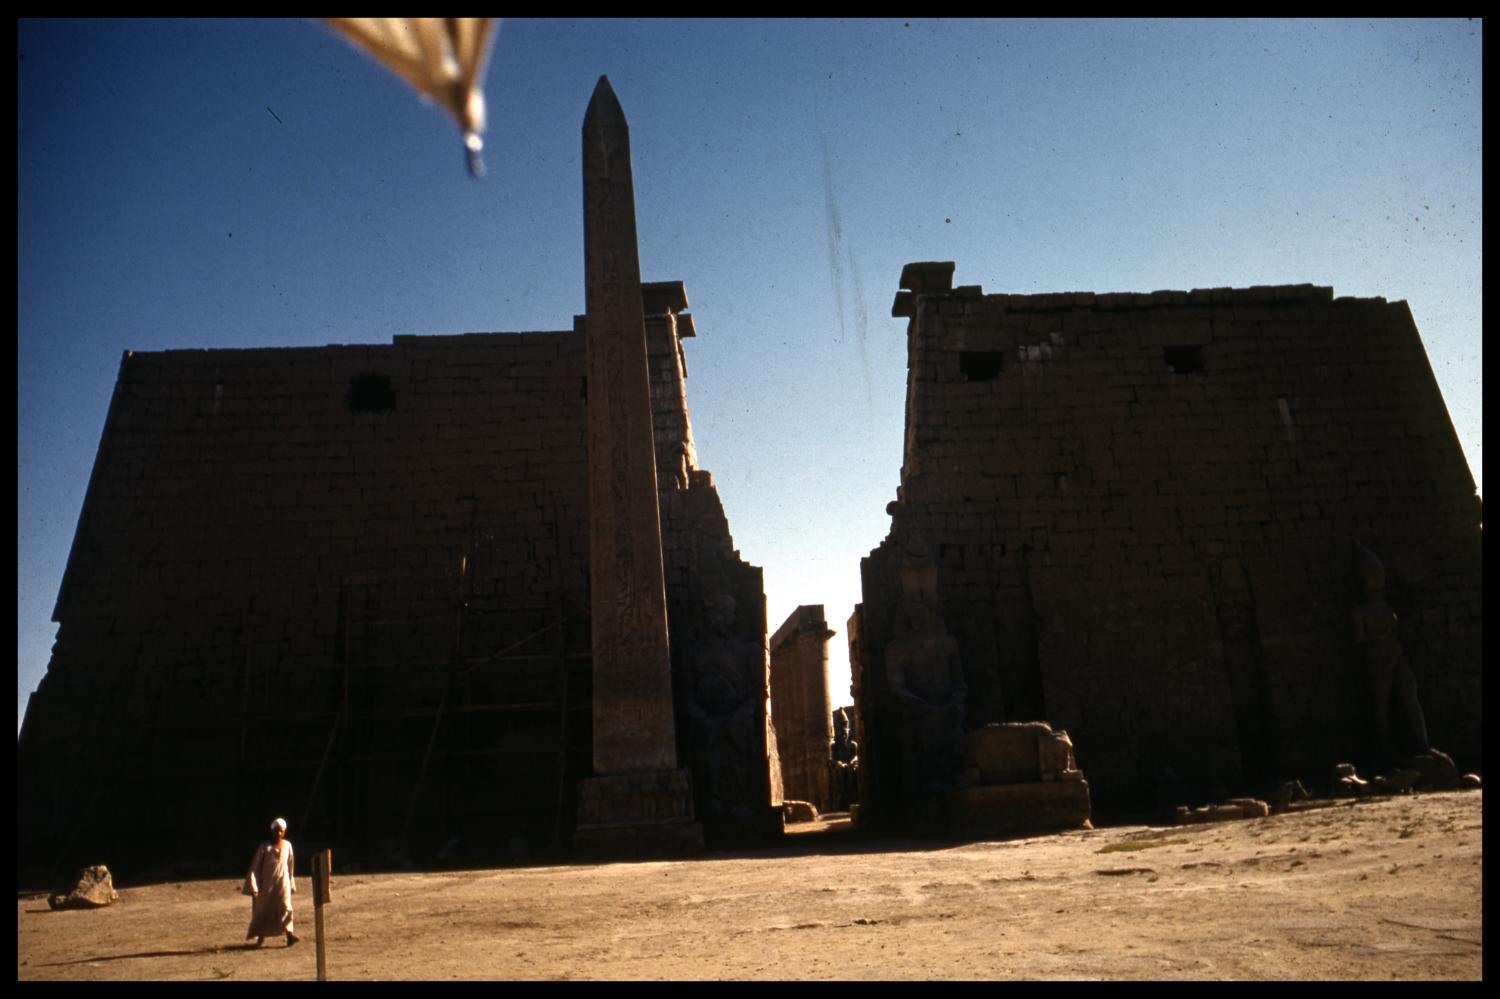 [Luxor Temple Entrance]
                                                
                                                    [Sequence #]: 1 of 1
                                                